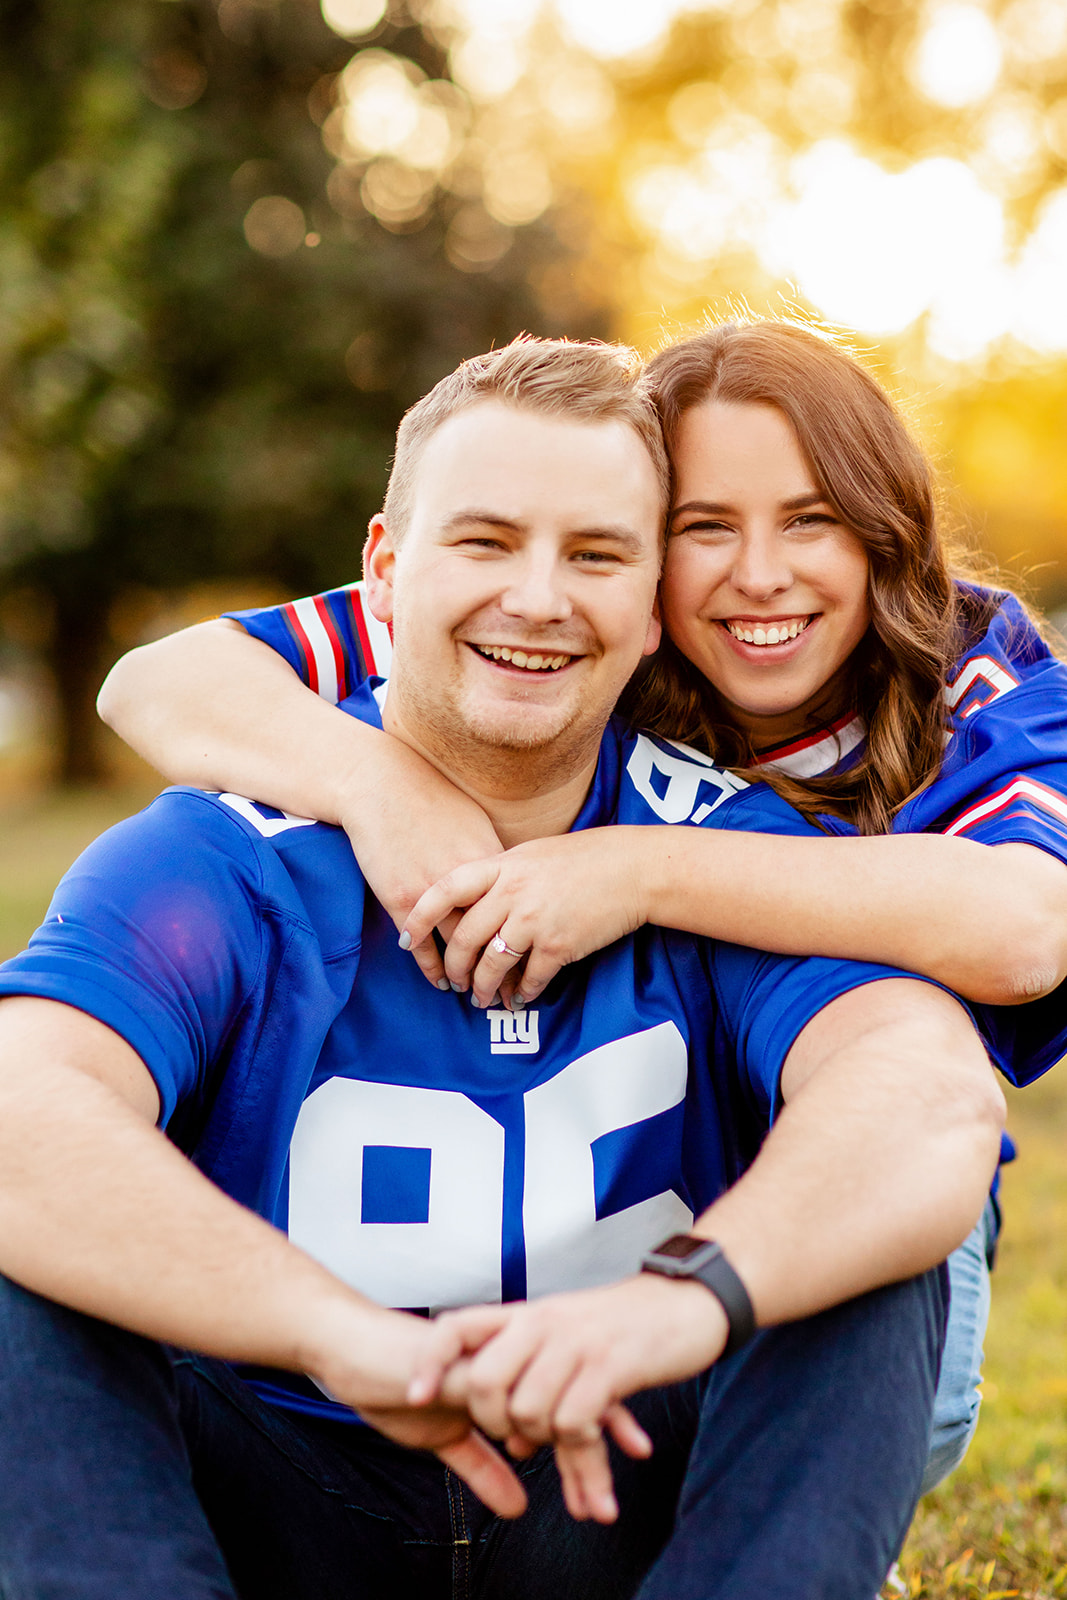 Beer  Football Themed Engagement Photo Shoot - Image Property of www.j-dphoto.com